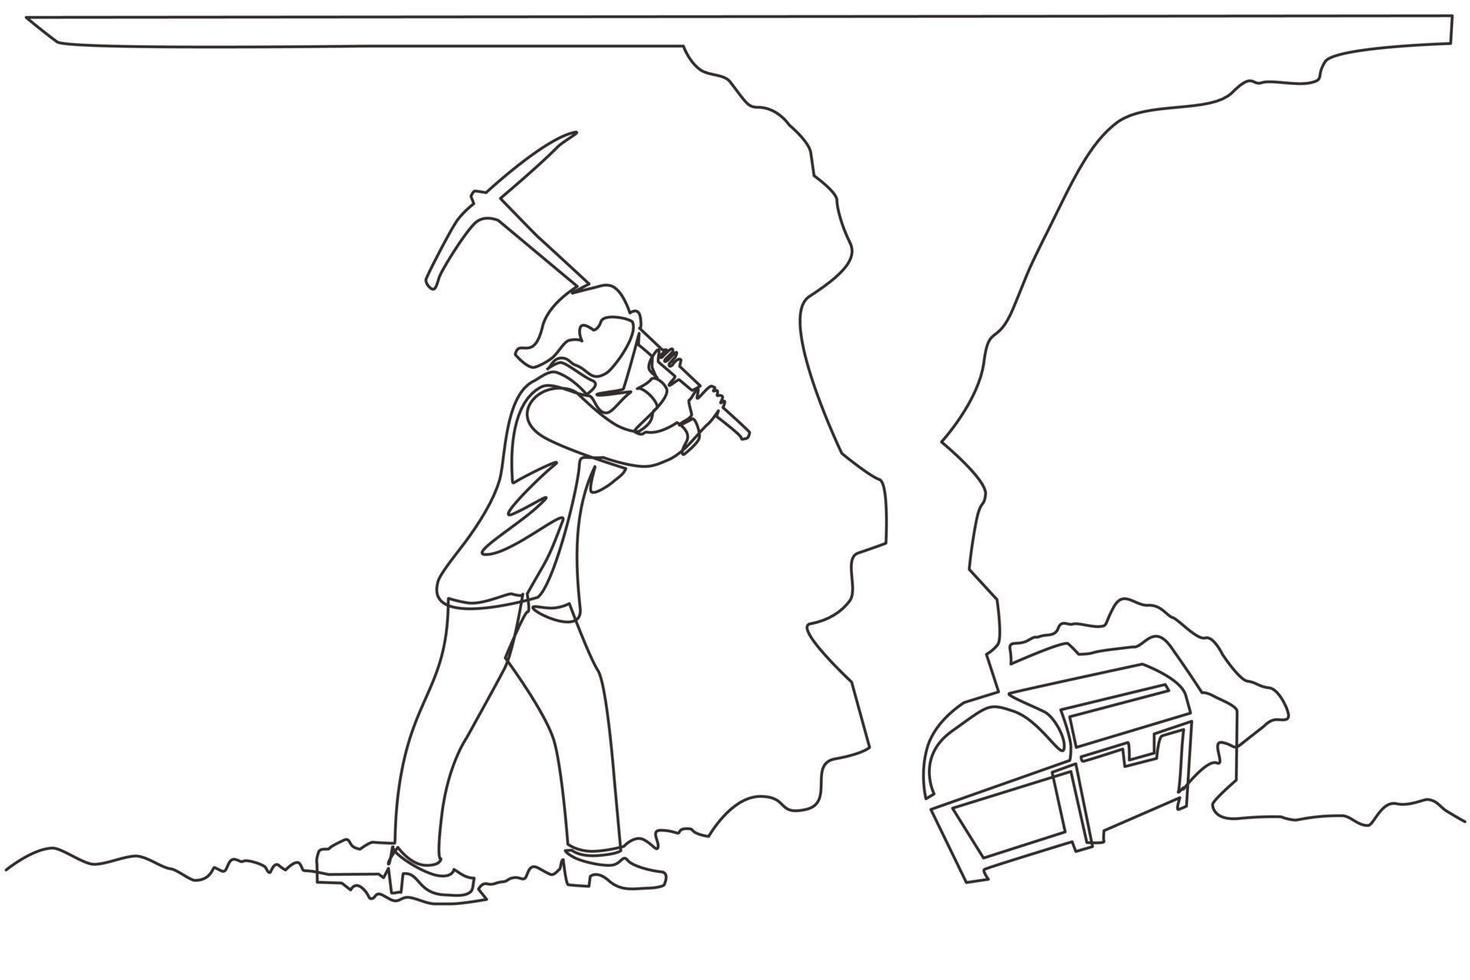 Single continuous line drawing businesswoman digging with pickaxe looking for hidden treasures. Woman digging and mining for treasure chest in underground tunnel. One line draw graphic design vector